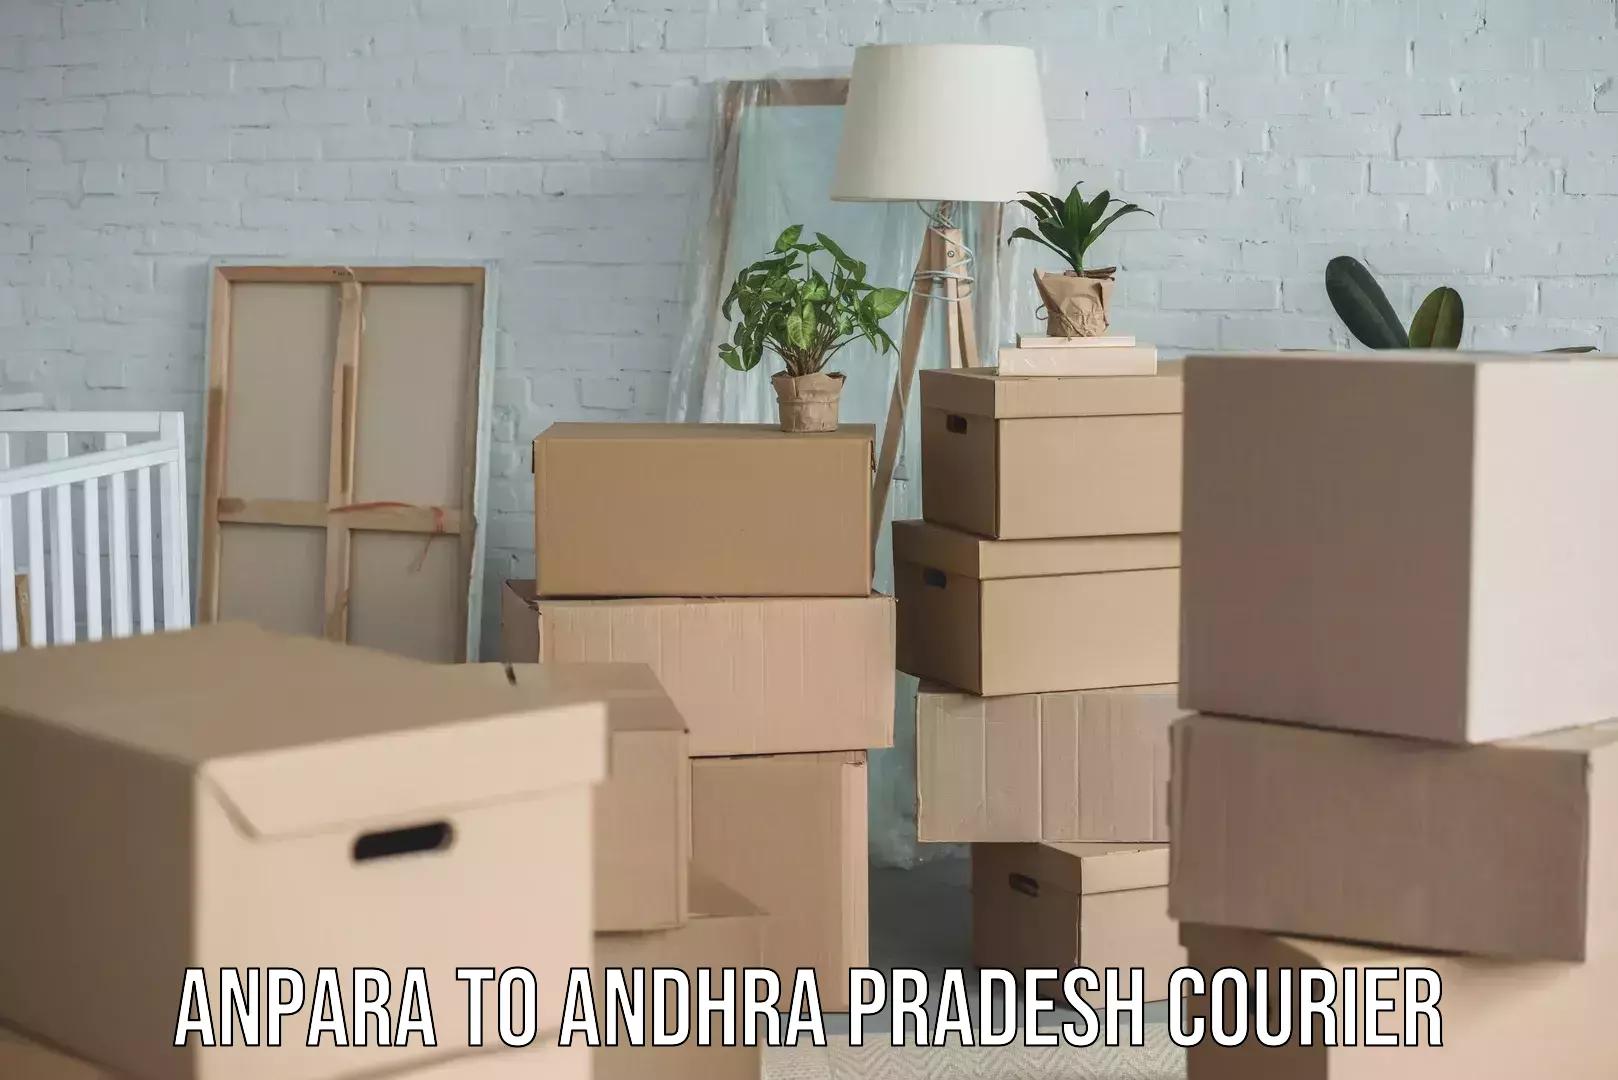 Optimized delivery routes in Anpara to Andhra Pradesh